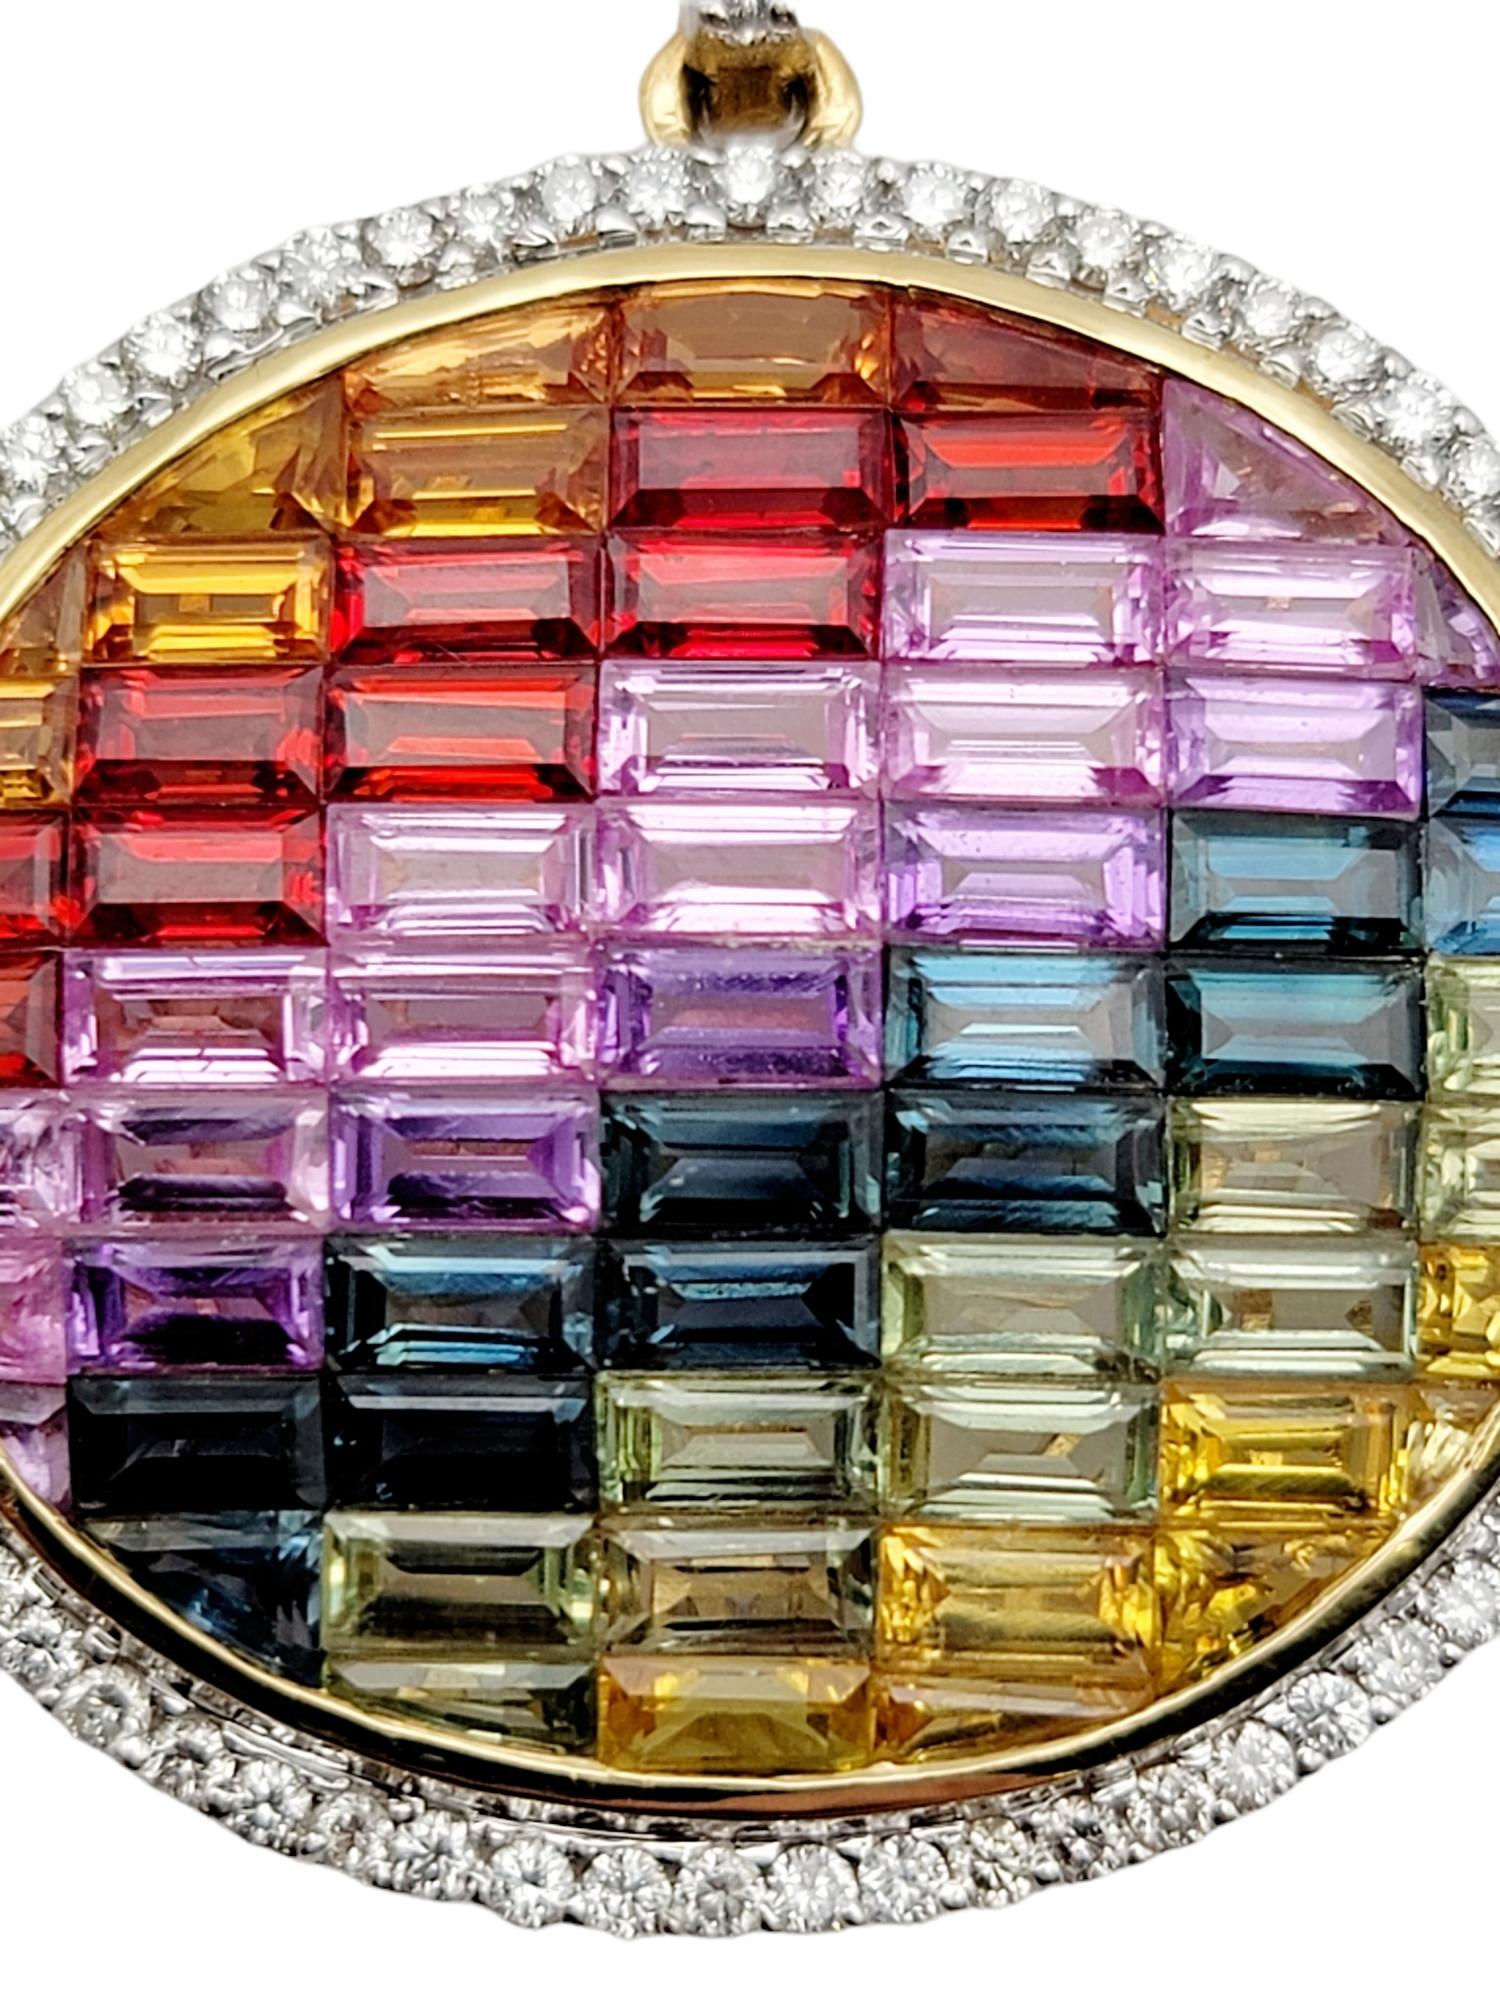 Vibrant and unique 'rainbow' sapphire pendant with a dazzling diamond halo. Colorful oval pendant is filled with invisible set baguette shaped lab-created sapphires in hues of red, orange, yellow, green, blue and purple. The natural diamond halo is